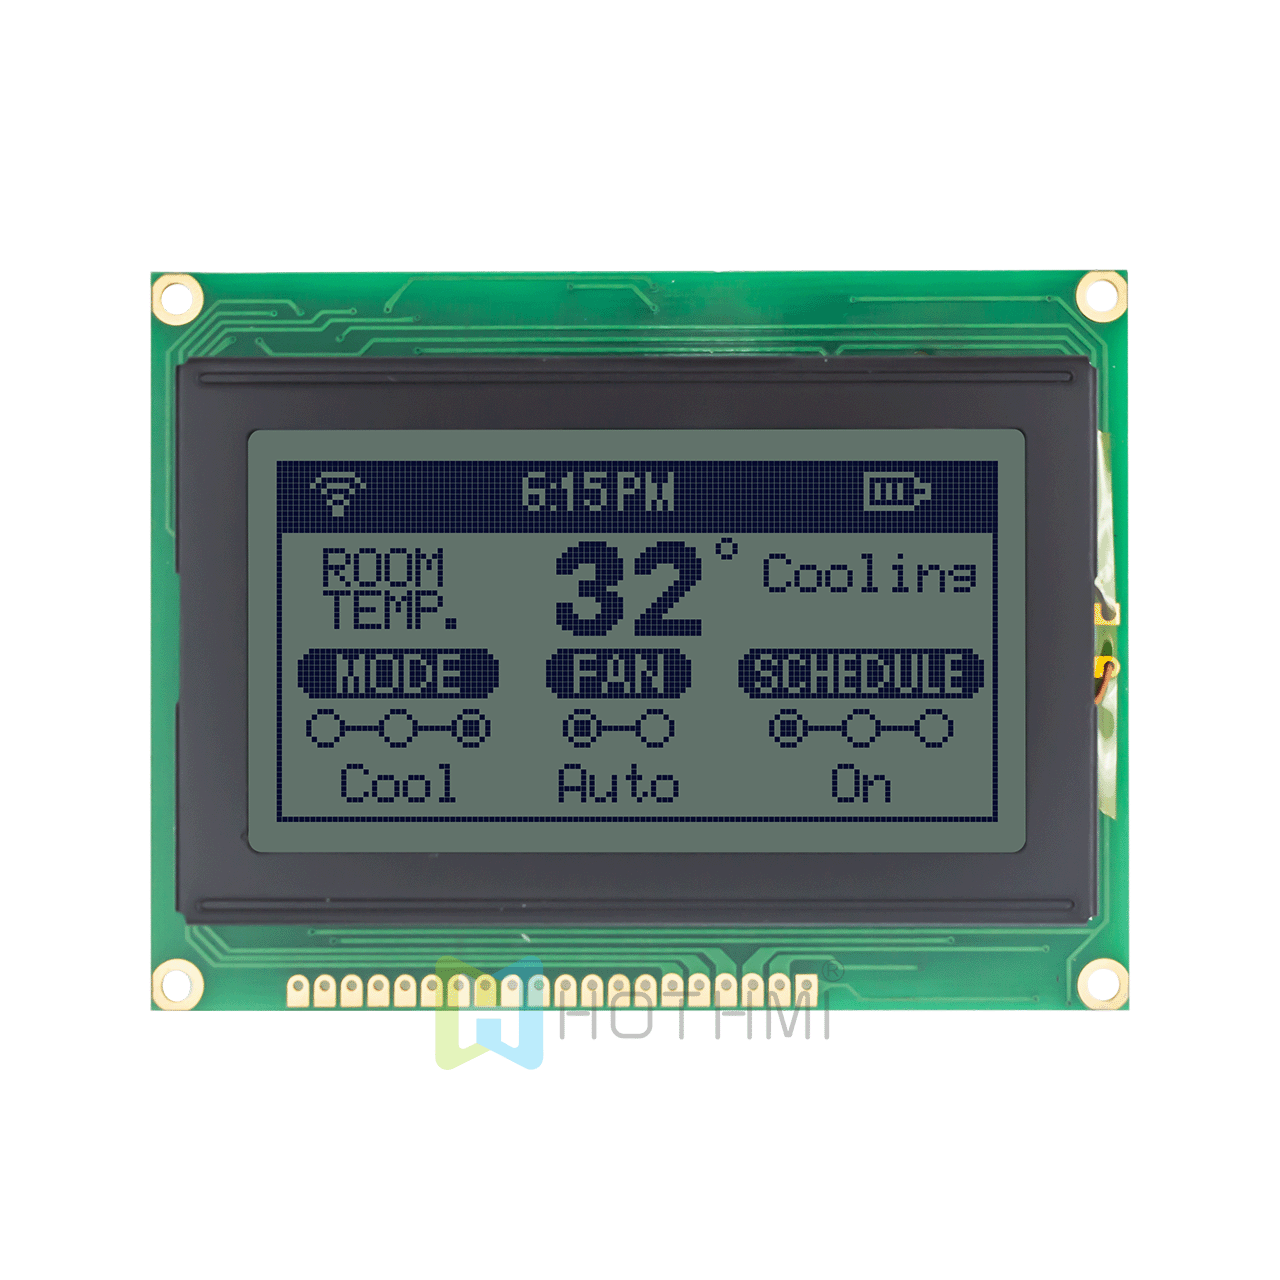 3.2" LCD12864 LCD screen/LCM128x64 graphic dot matrix module/yellow-green background with gray characters